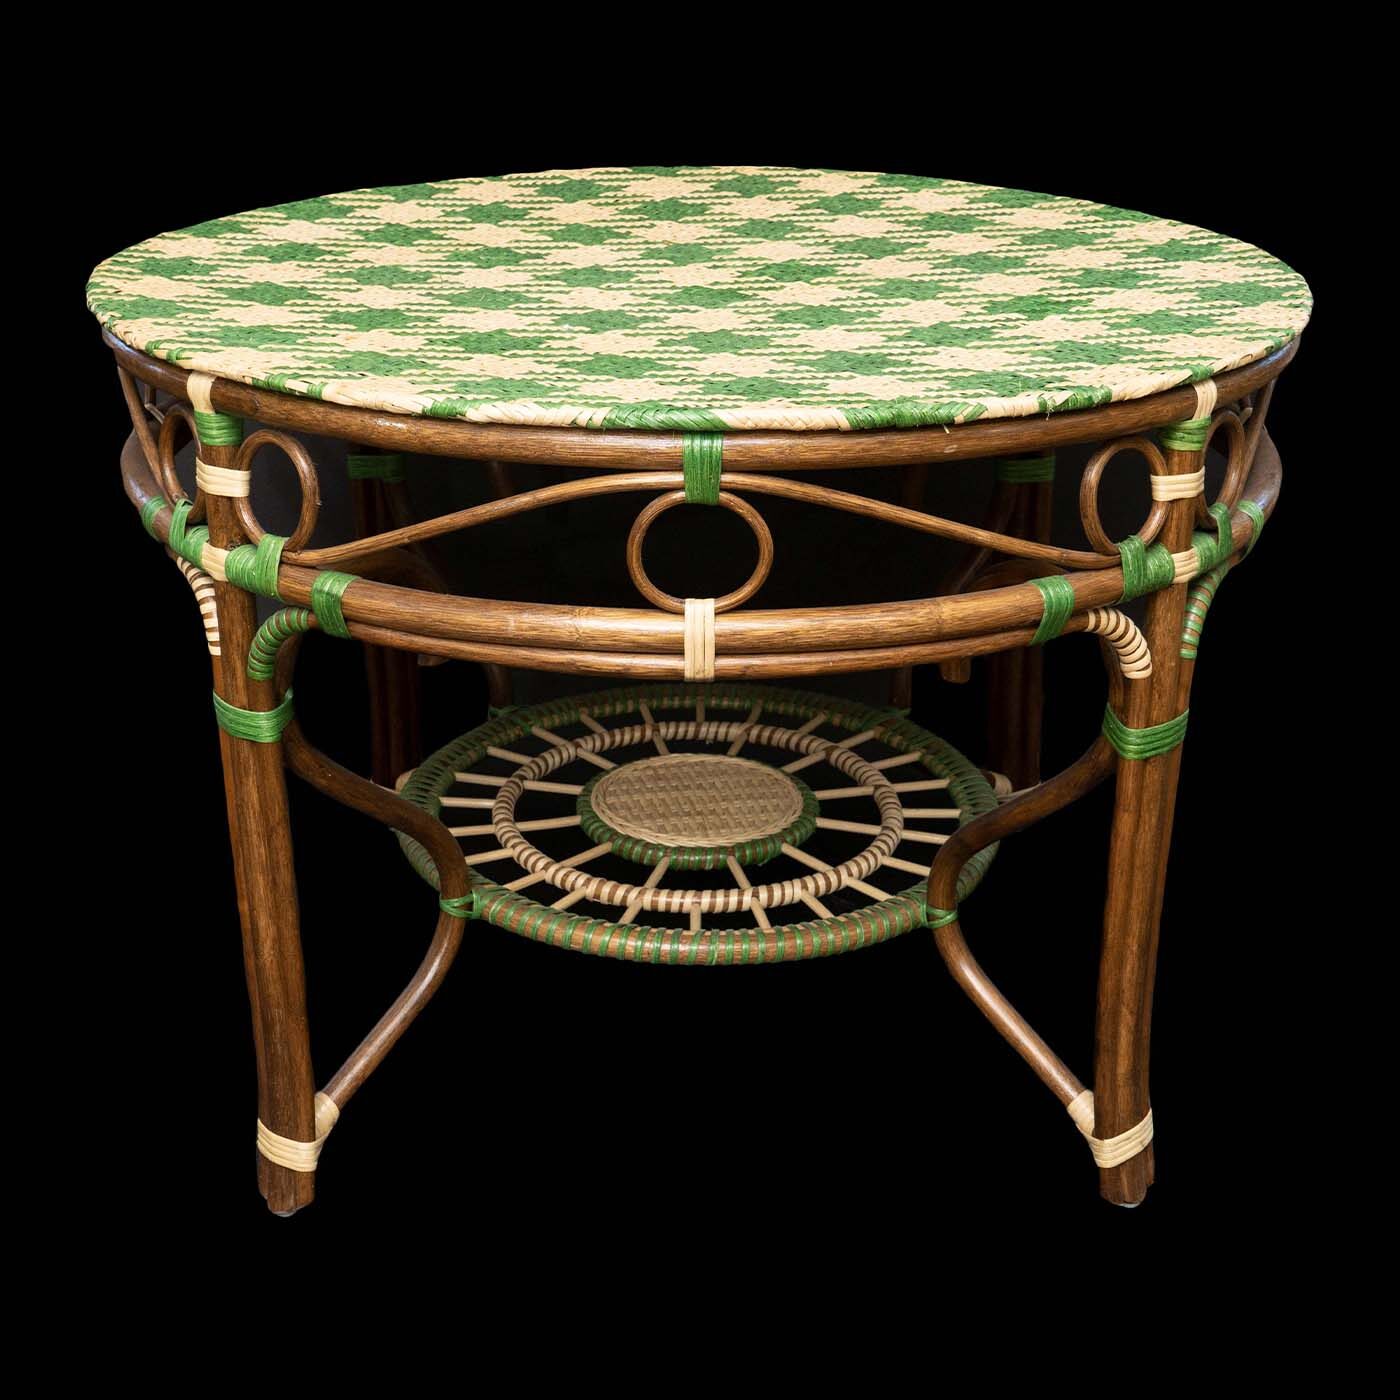 Creel and Gow Green and Cream Rattan Center Table with Hounds Tooth Top Design